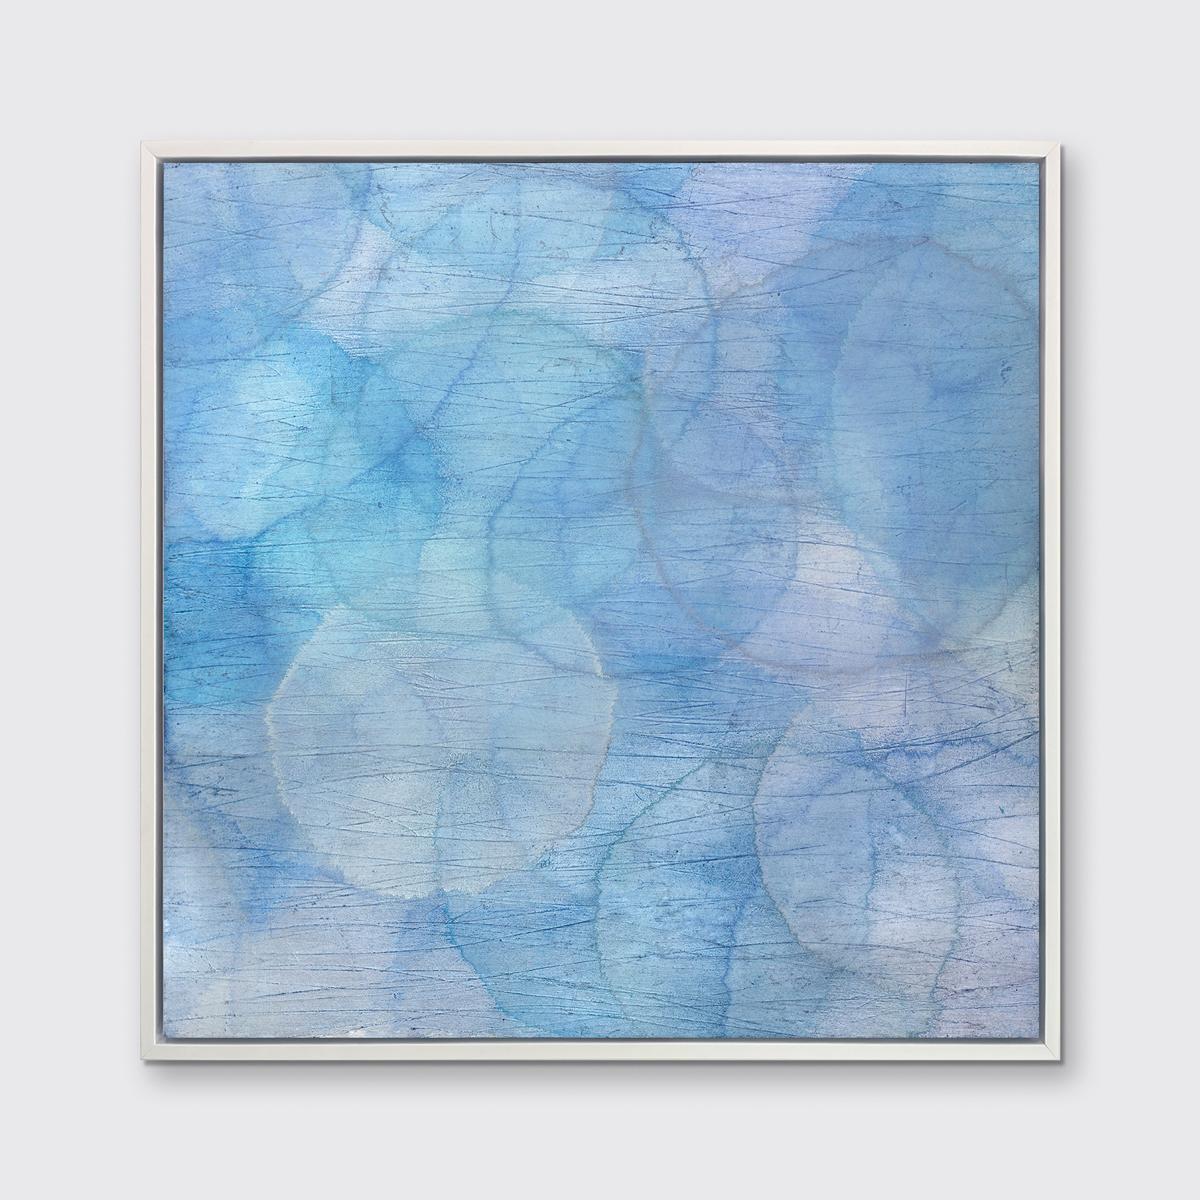 This abstract limited edition print by Roger Mudre features a cool blue and silver palette, with light circular shapes layered over one another. It pairs with Caulophyllum II and II by the same artist (see image gallery) - please contact us to